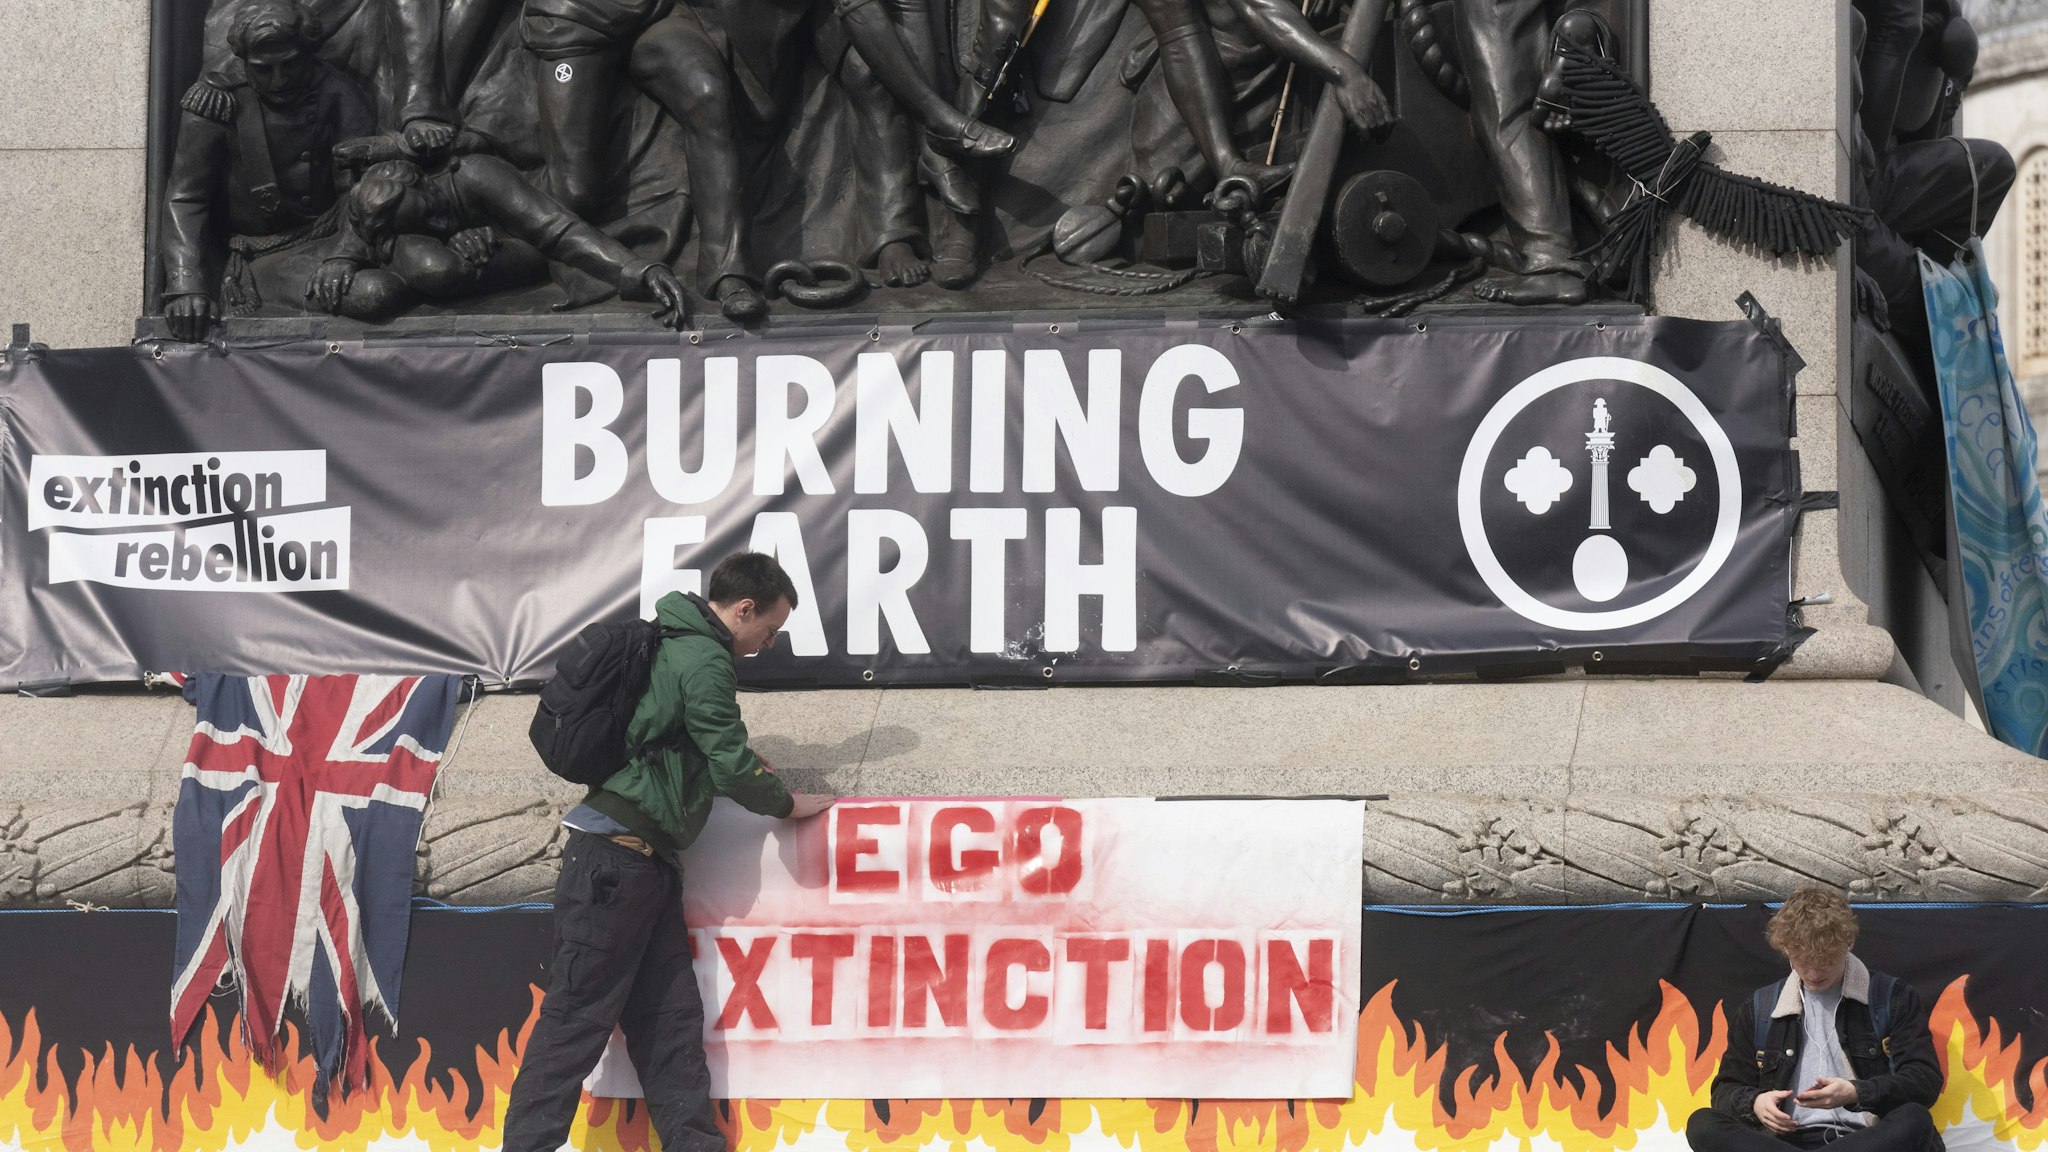 Environmentalist group 'Extinction Rebellion' continues to stage protests in second day occupying central locations including Trafalgar Square, Victoria Street, Parliament Street in London, United Kingdom on October 9, 2019. Metropolitan police cleared a number of locations from protesters by arresting more than 600 of them since yesterday. (Photo by Ray Tang/Anadolu Agency via Getty Images)